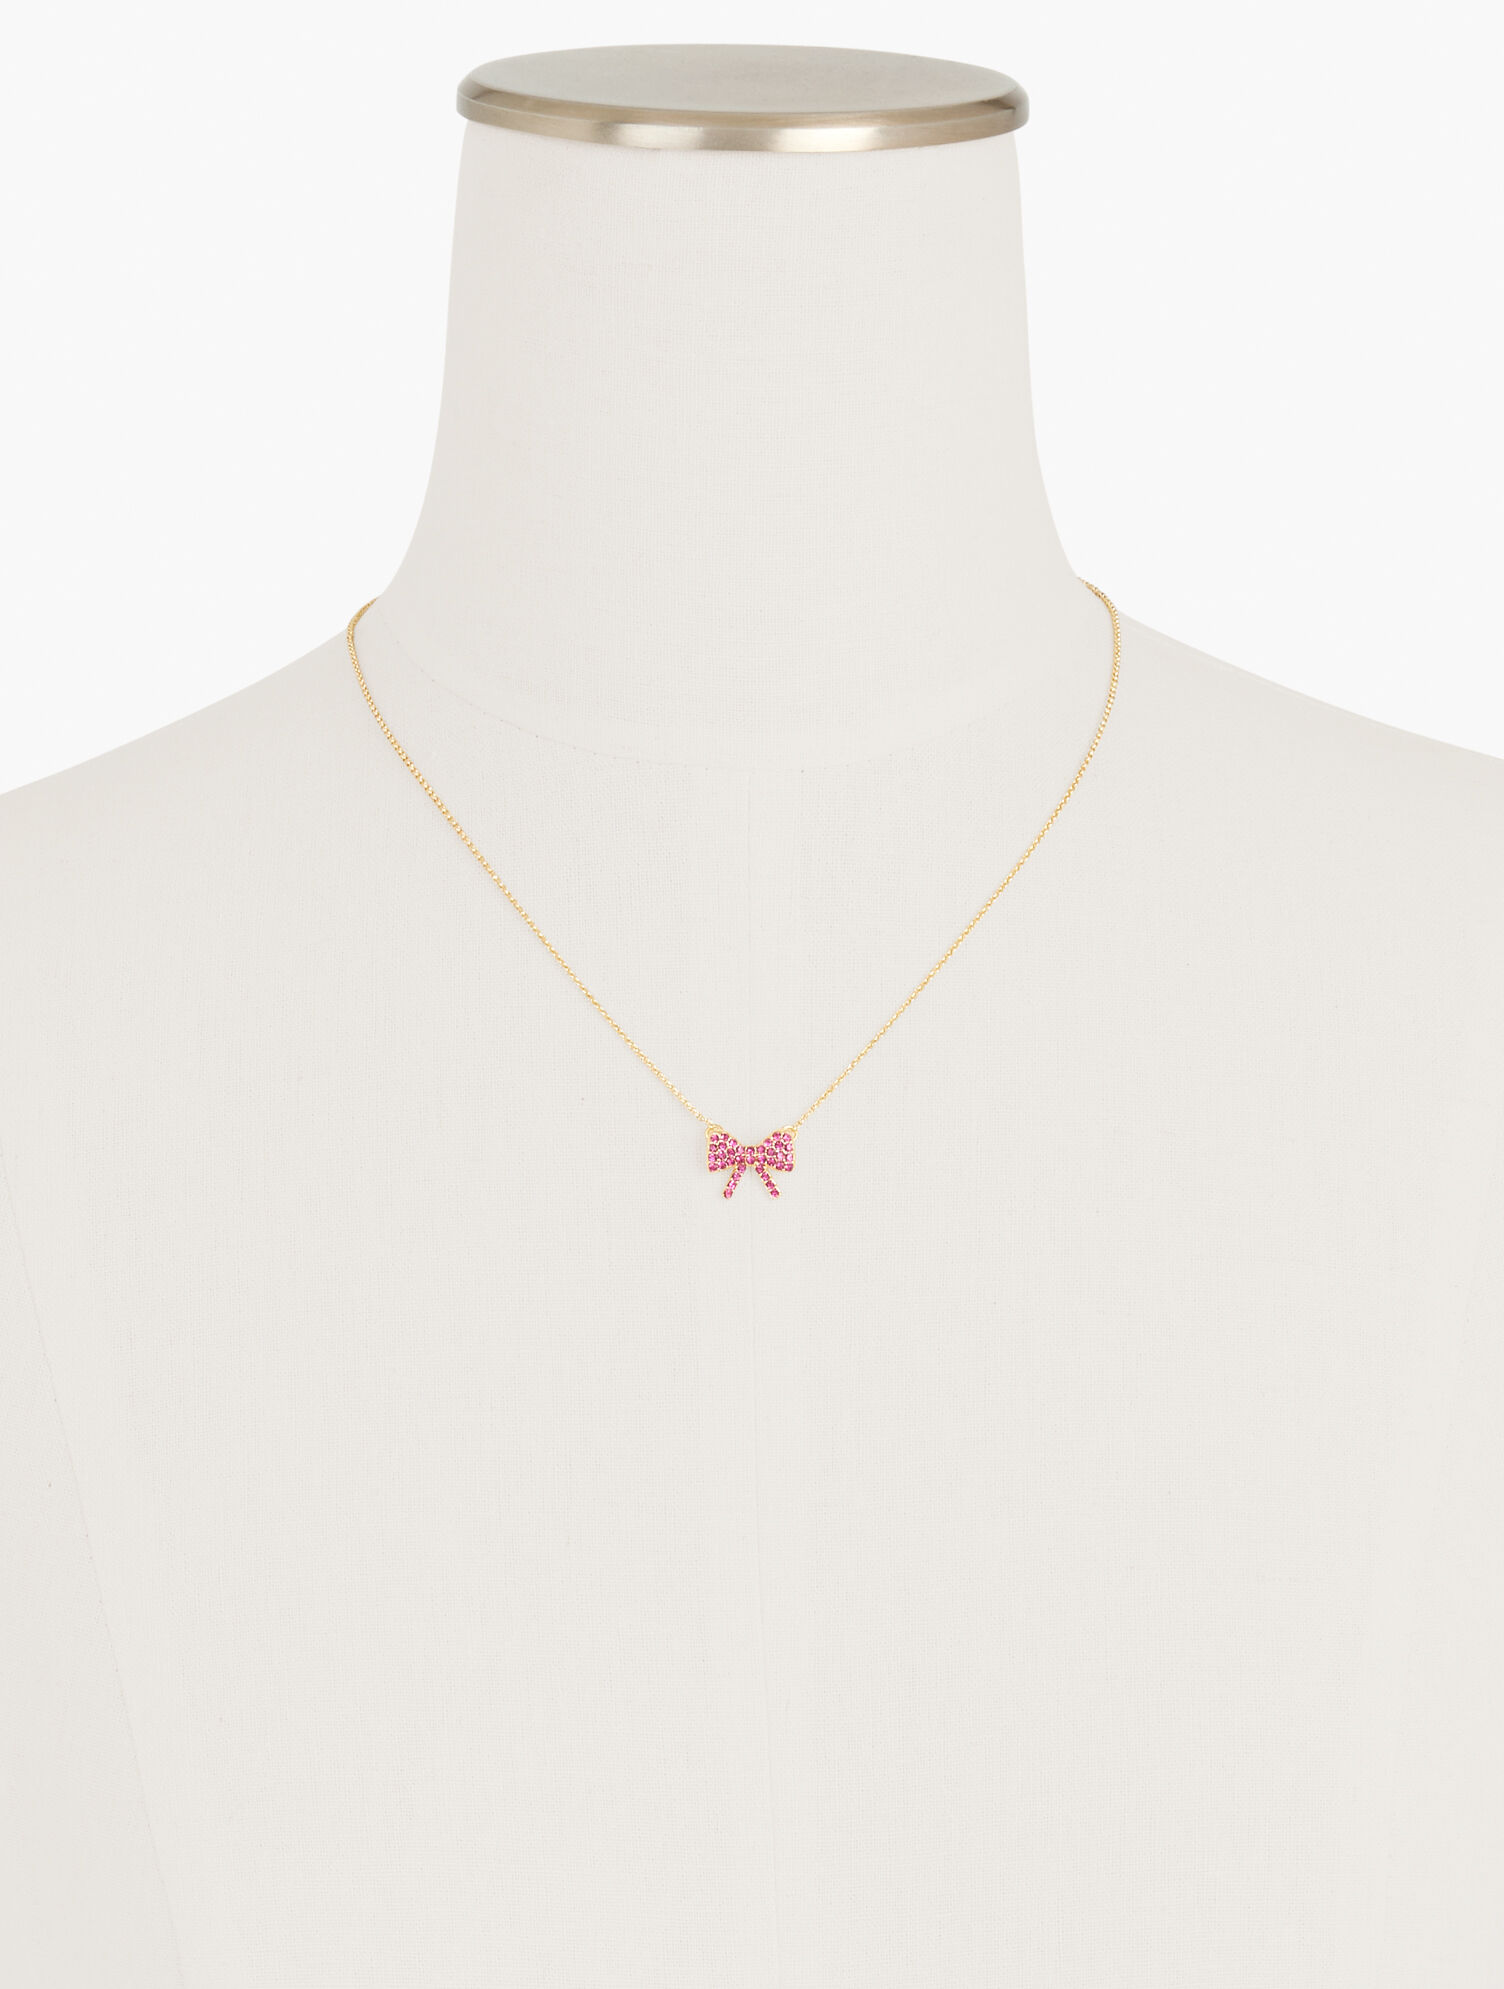 Pink and Gold Bow Necklace/ Bracelet set with gold and pink beads for –  AK's Hidden Gems